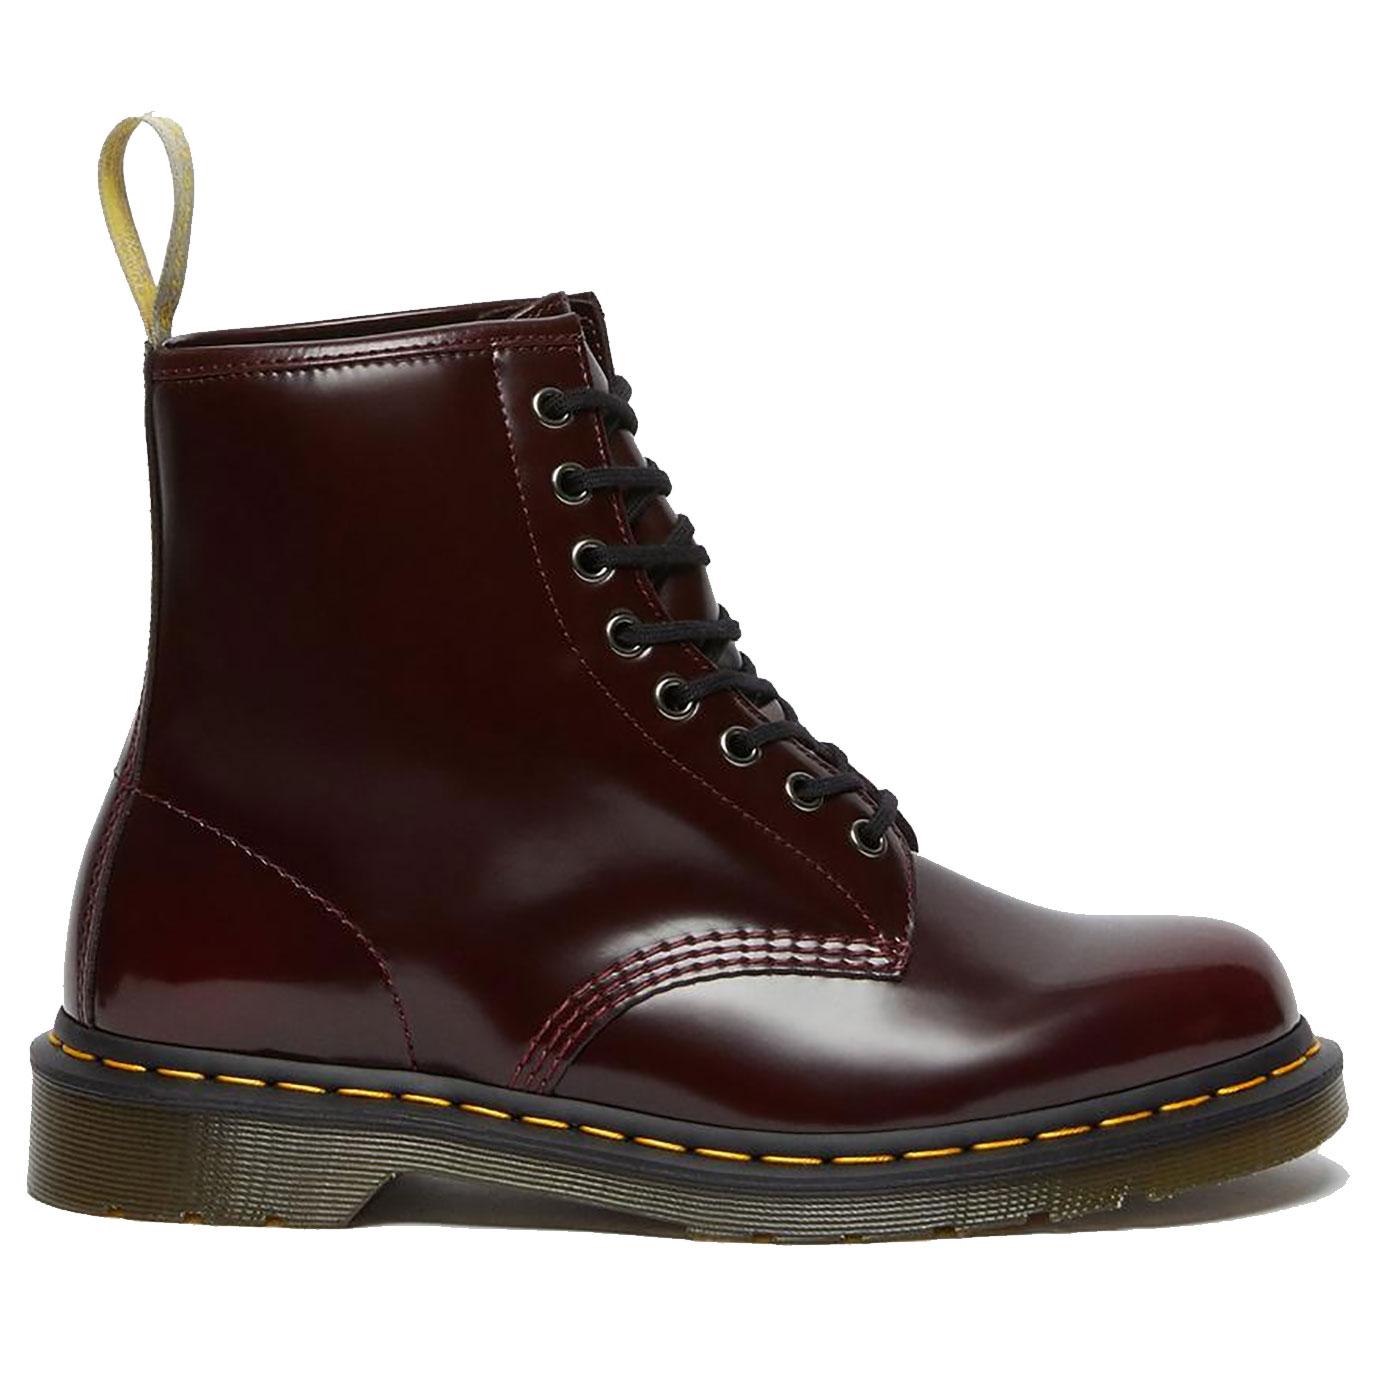 Dr Martens Vegan 1460 Oxford Retro 70s Boots in Cherry Red